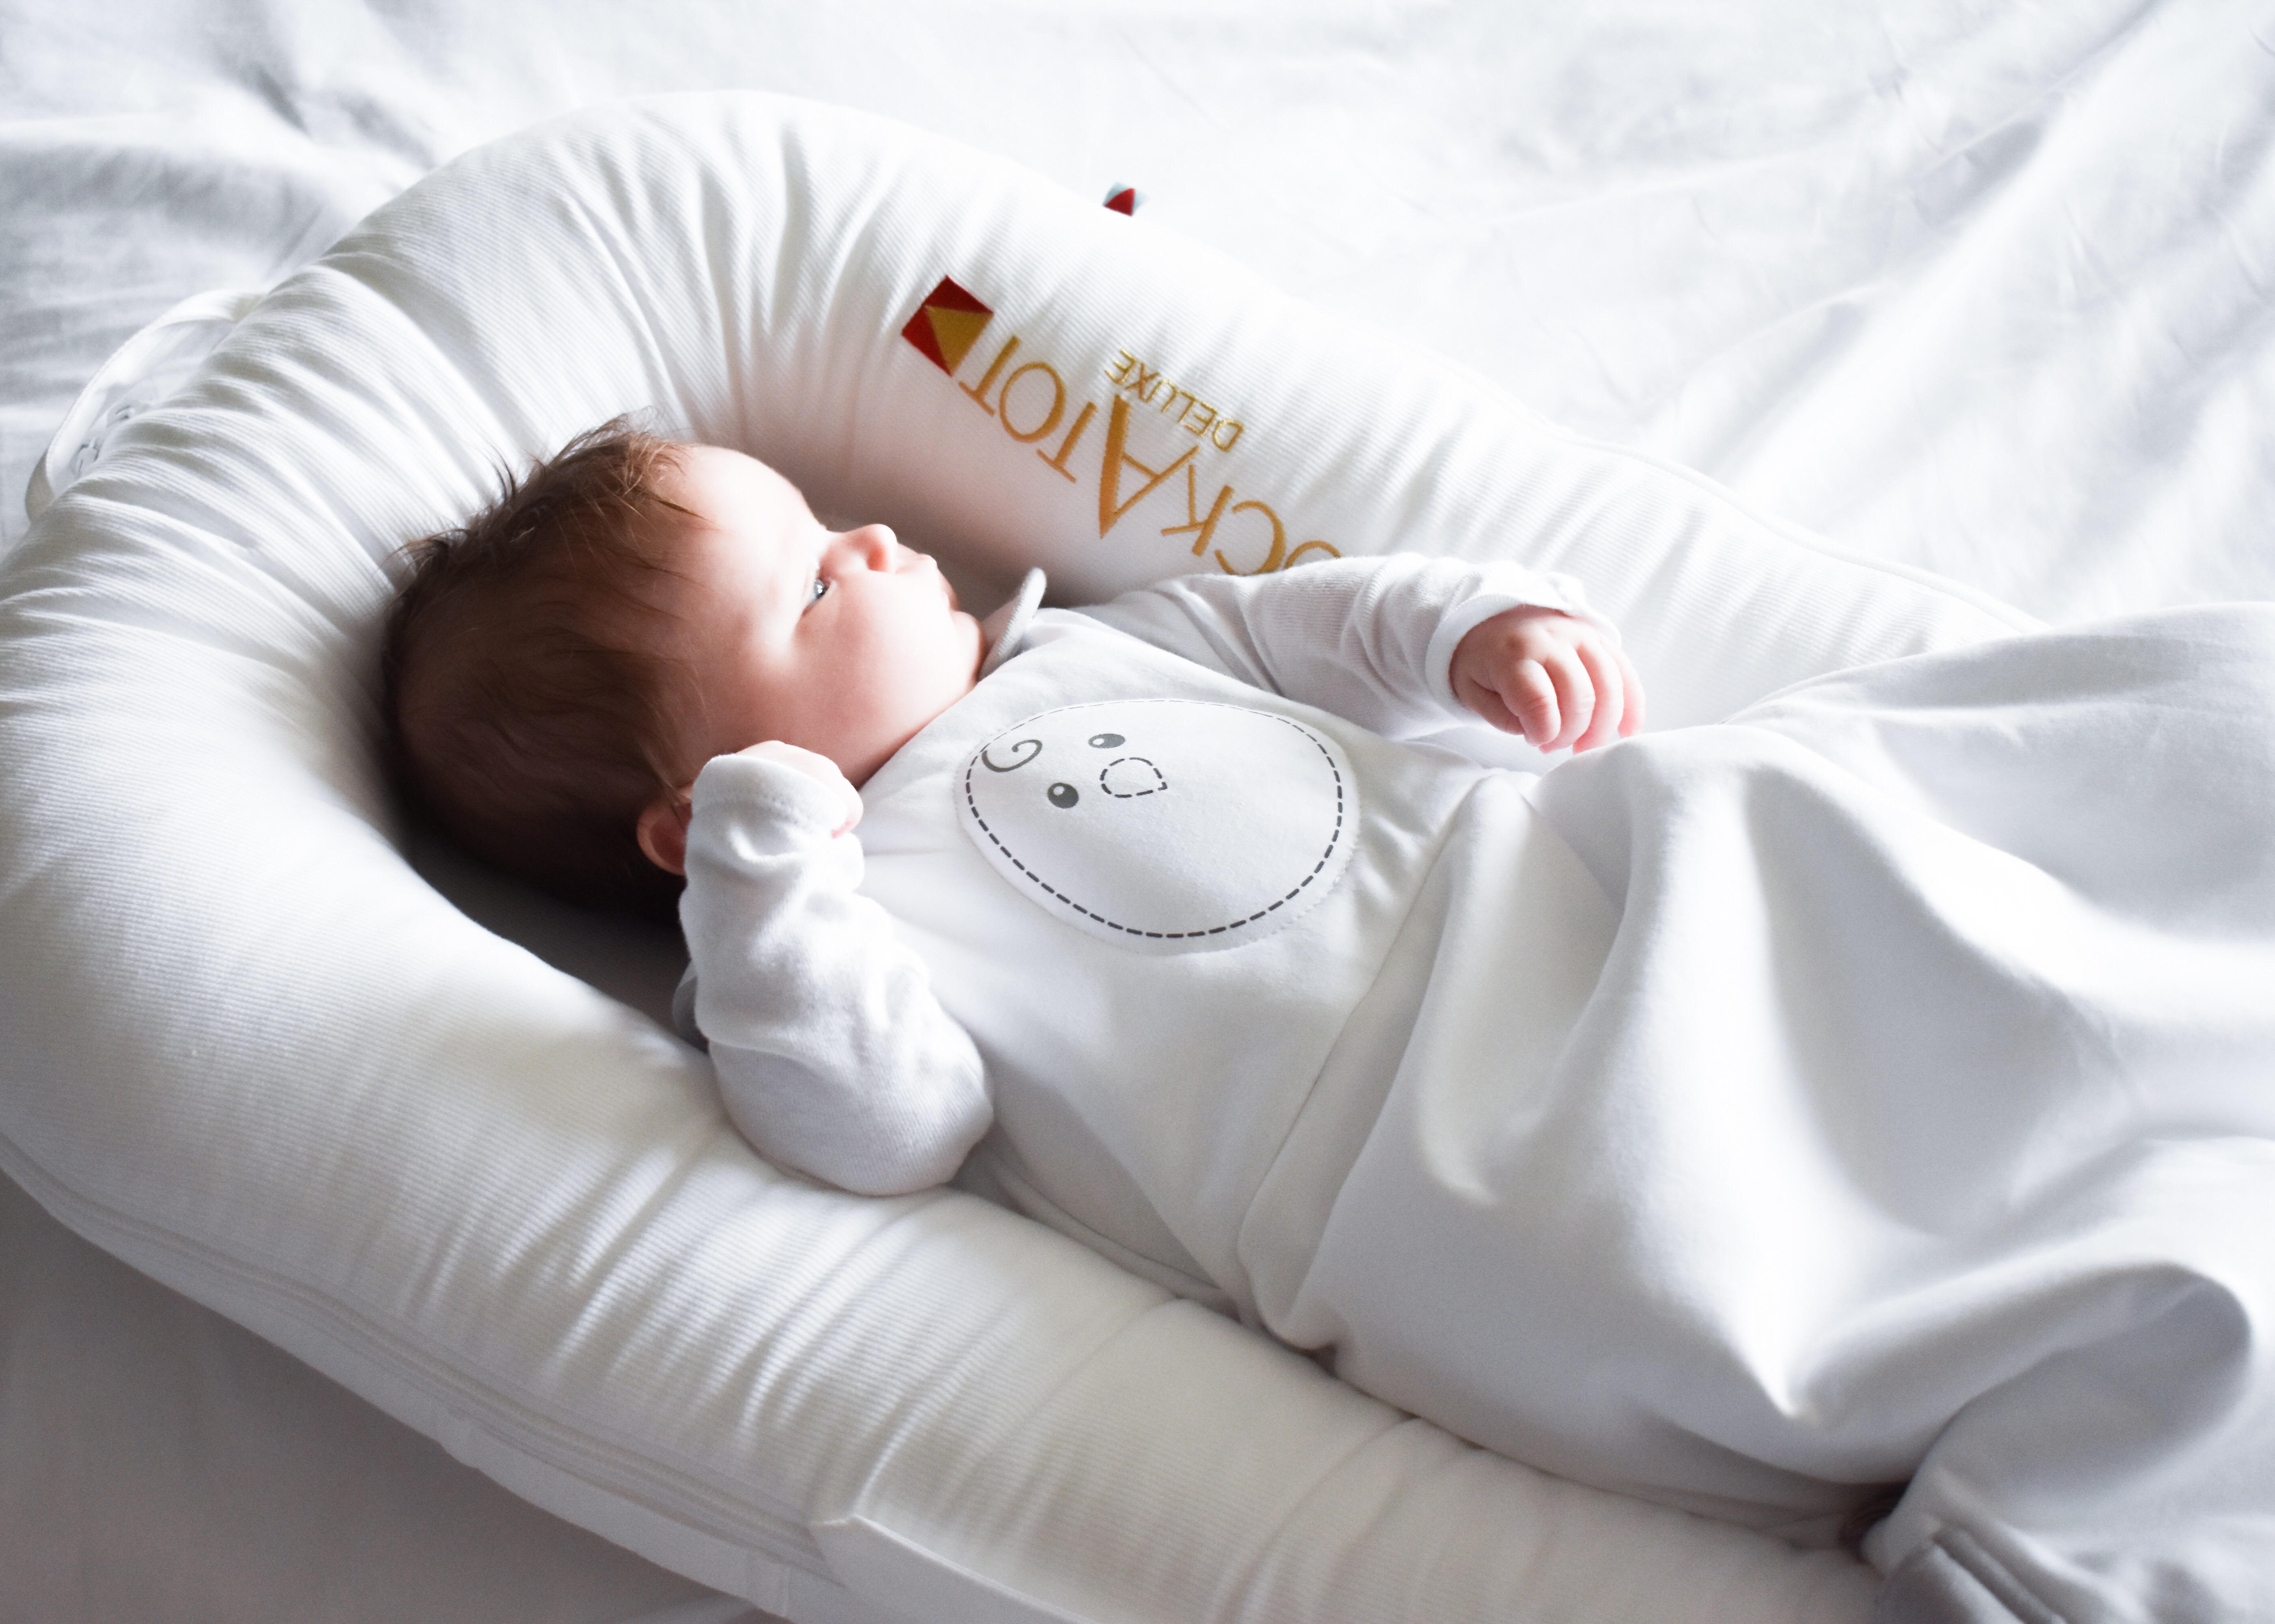 Help Baby Sleep Better in Winter! Looking for baby sleep advice for the winter months? Here's how to get baby to sleep through the night during the cold winter months and how to get baby to adjust to Daylight Savings Time! Plus, a Nested Bean review and exclusive discount code! [ad]